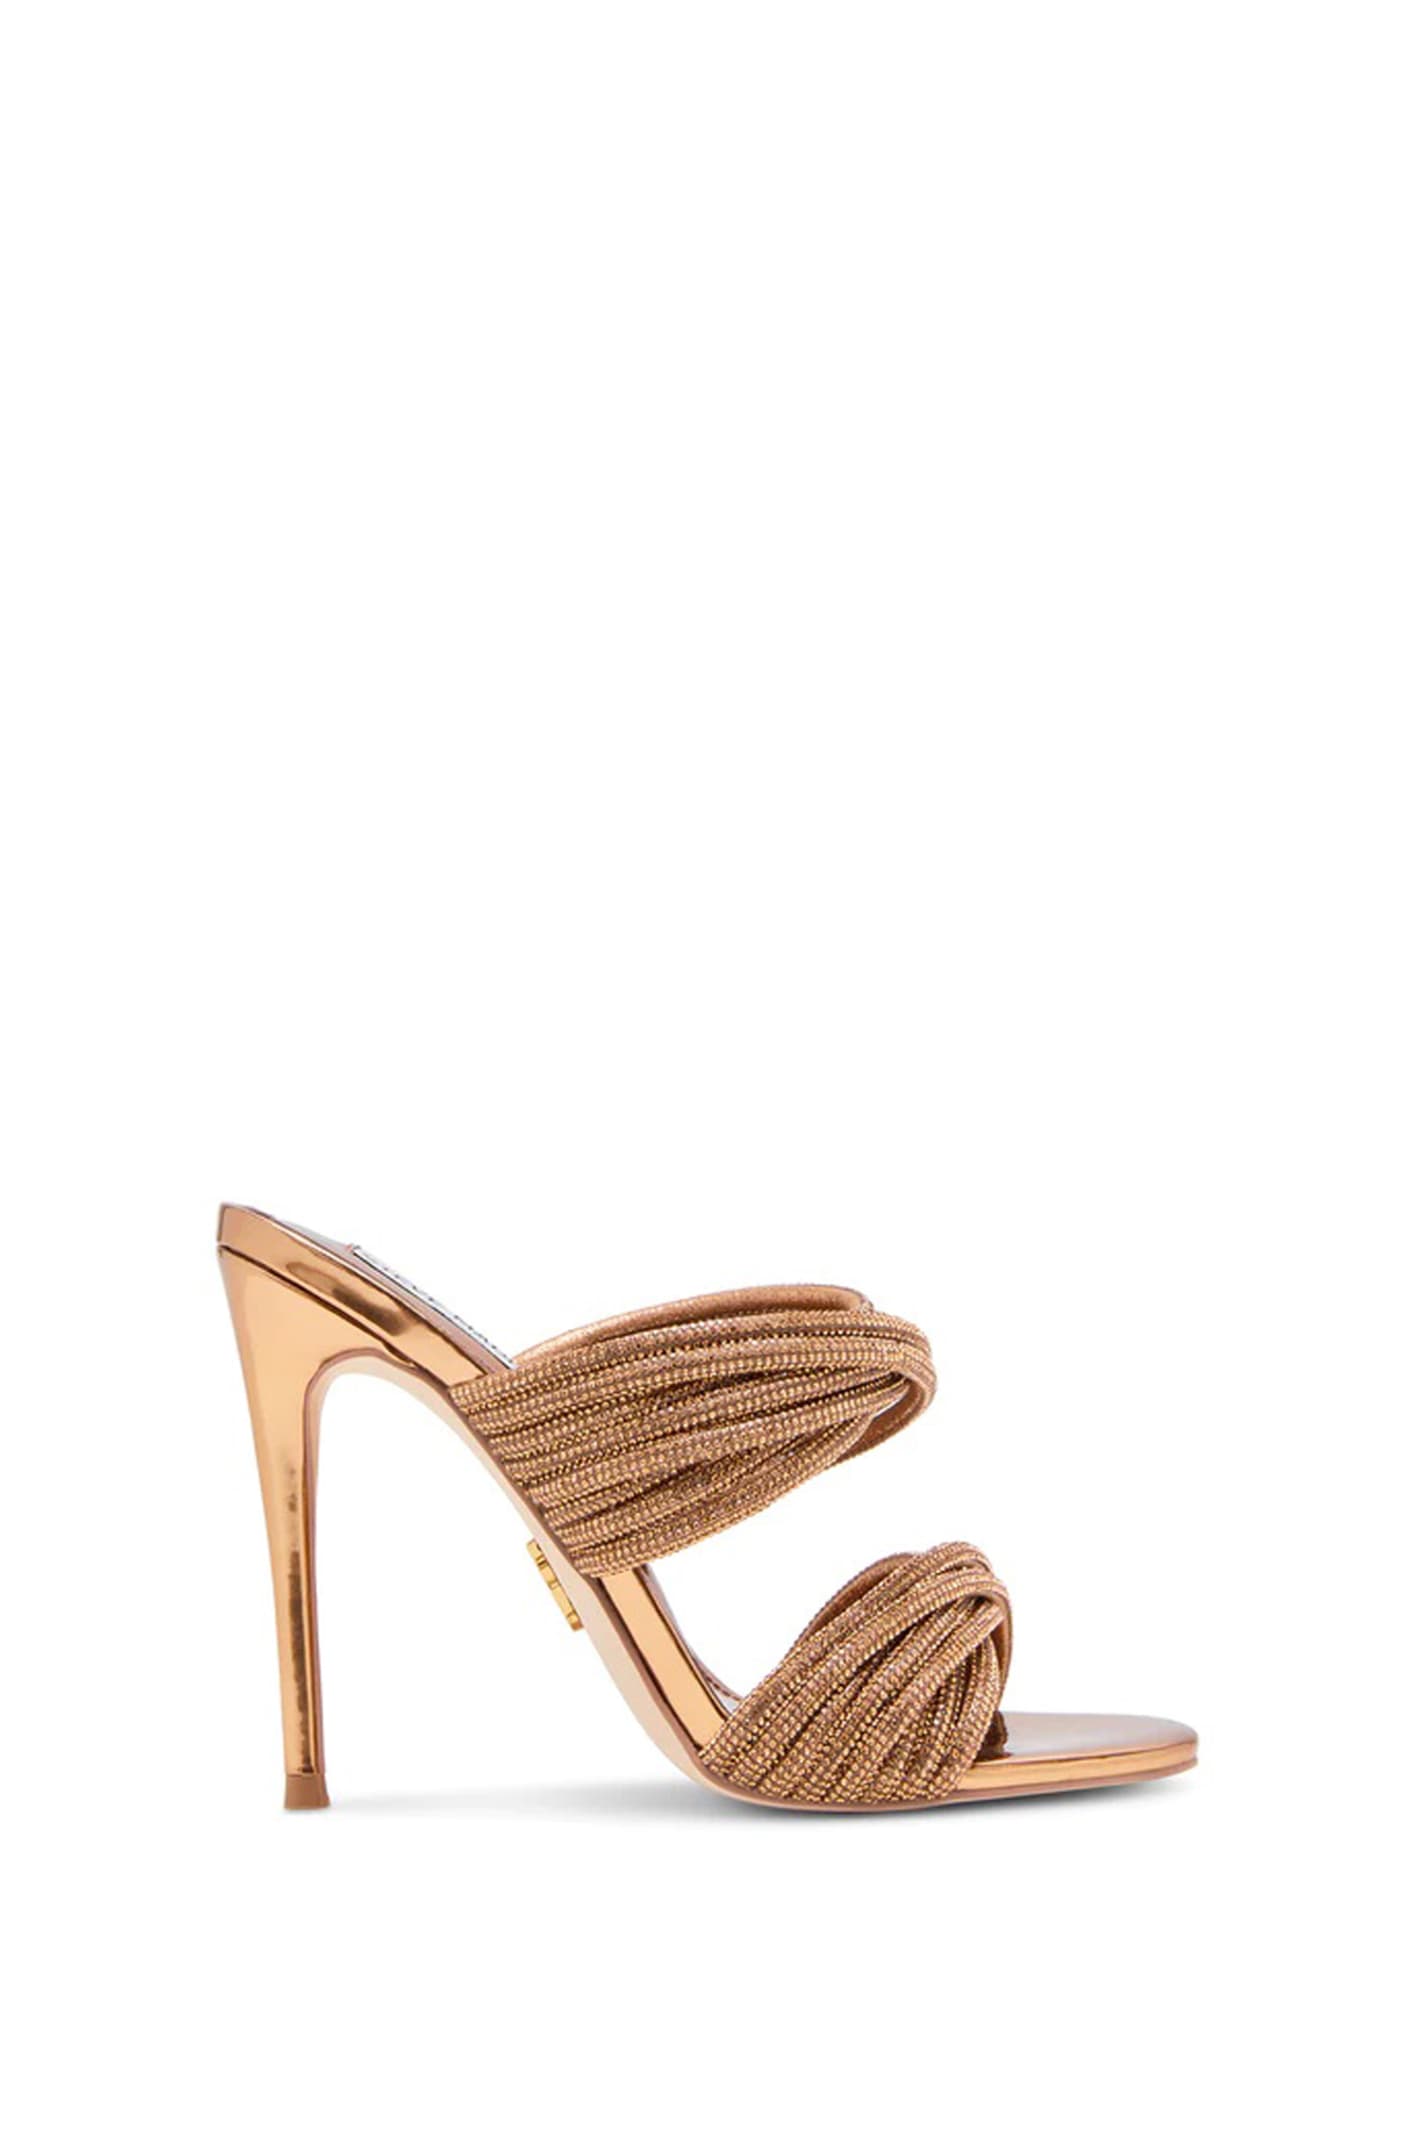 Shop Steve Madden Shoes With Heels In Brown